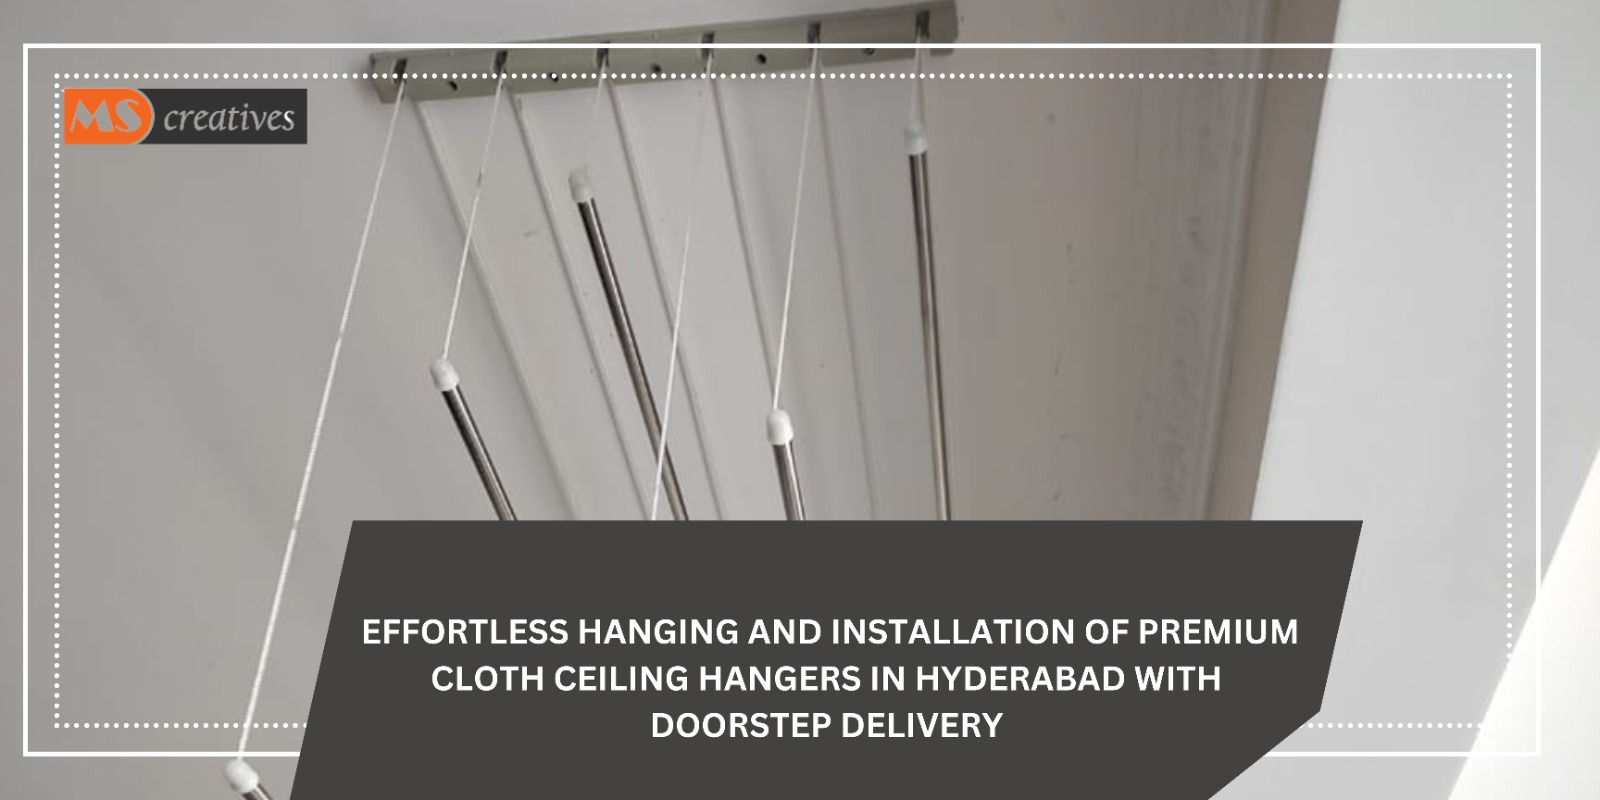 You are currently viewing Effortless Hanging and Installation of Premium Cloth Ceiling Hangers in Hyderabad with Doorstep Delivery